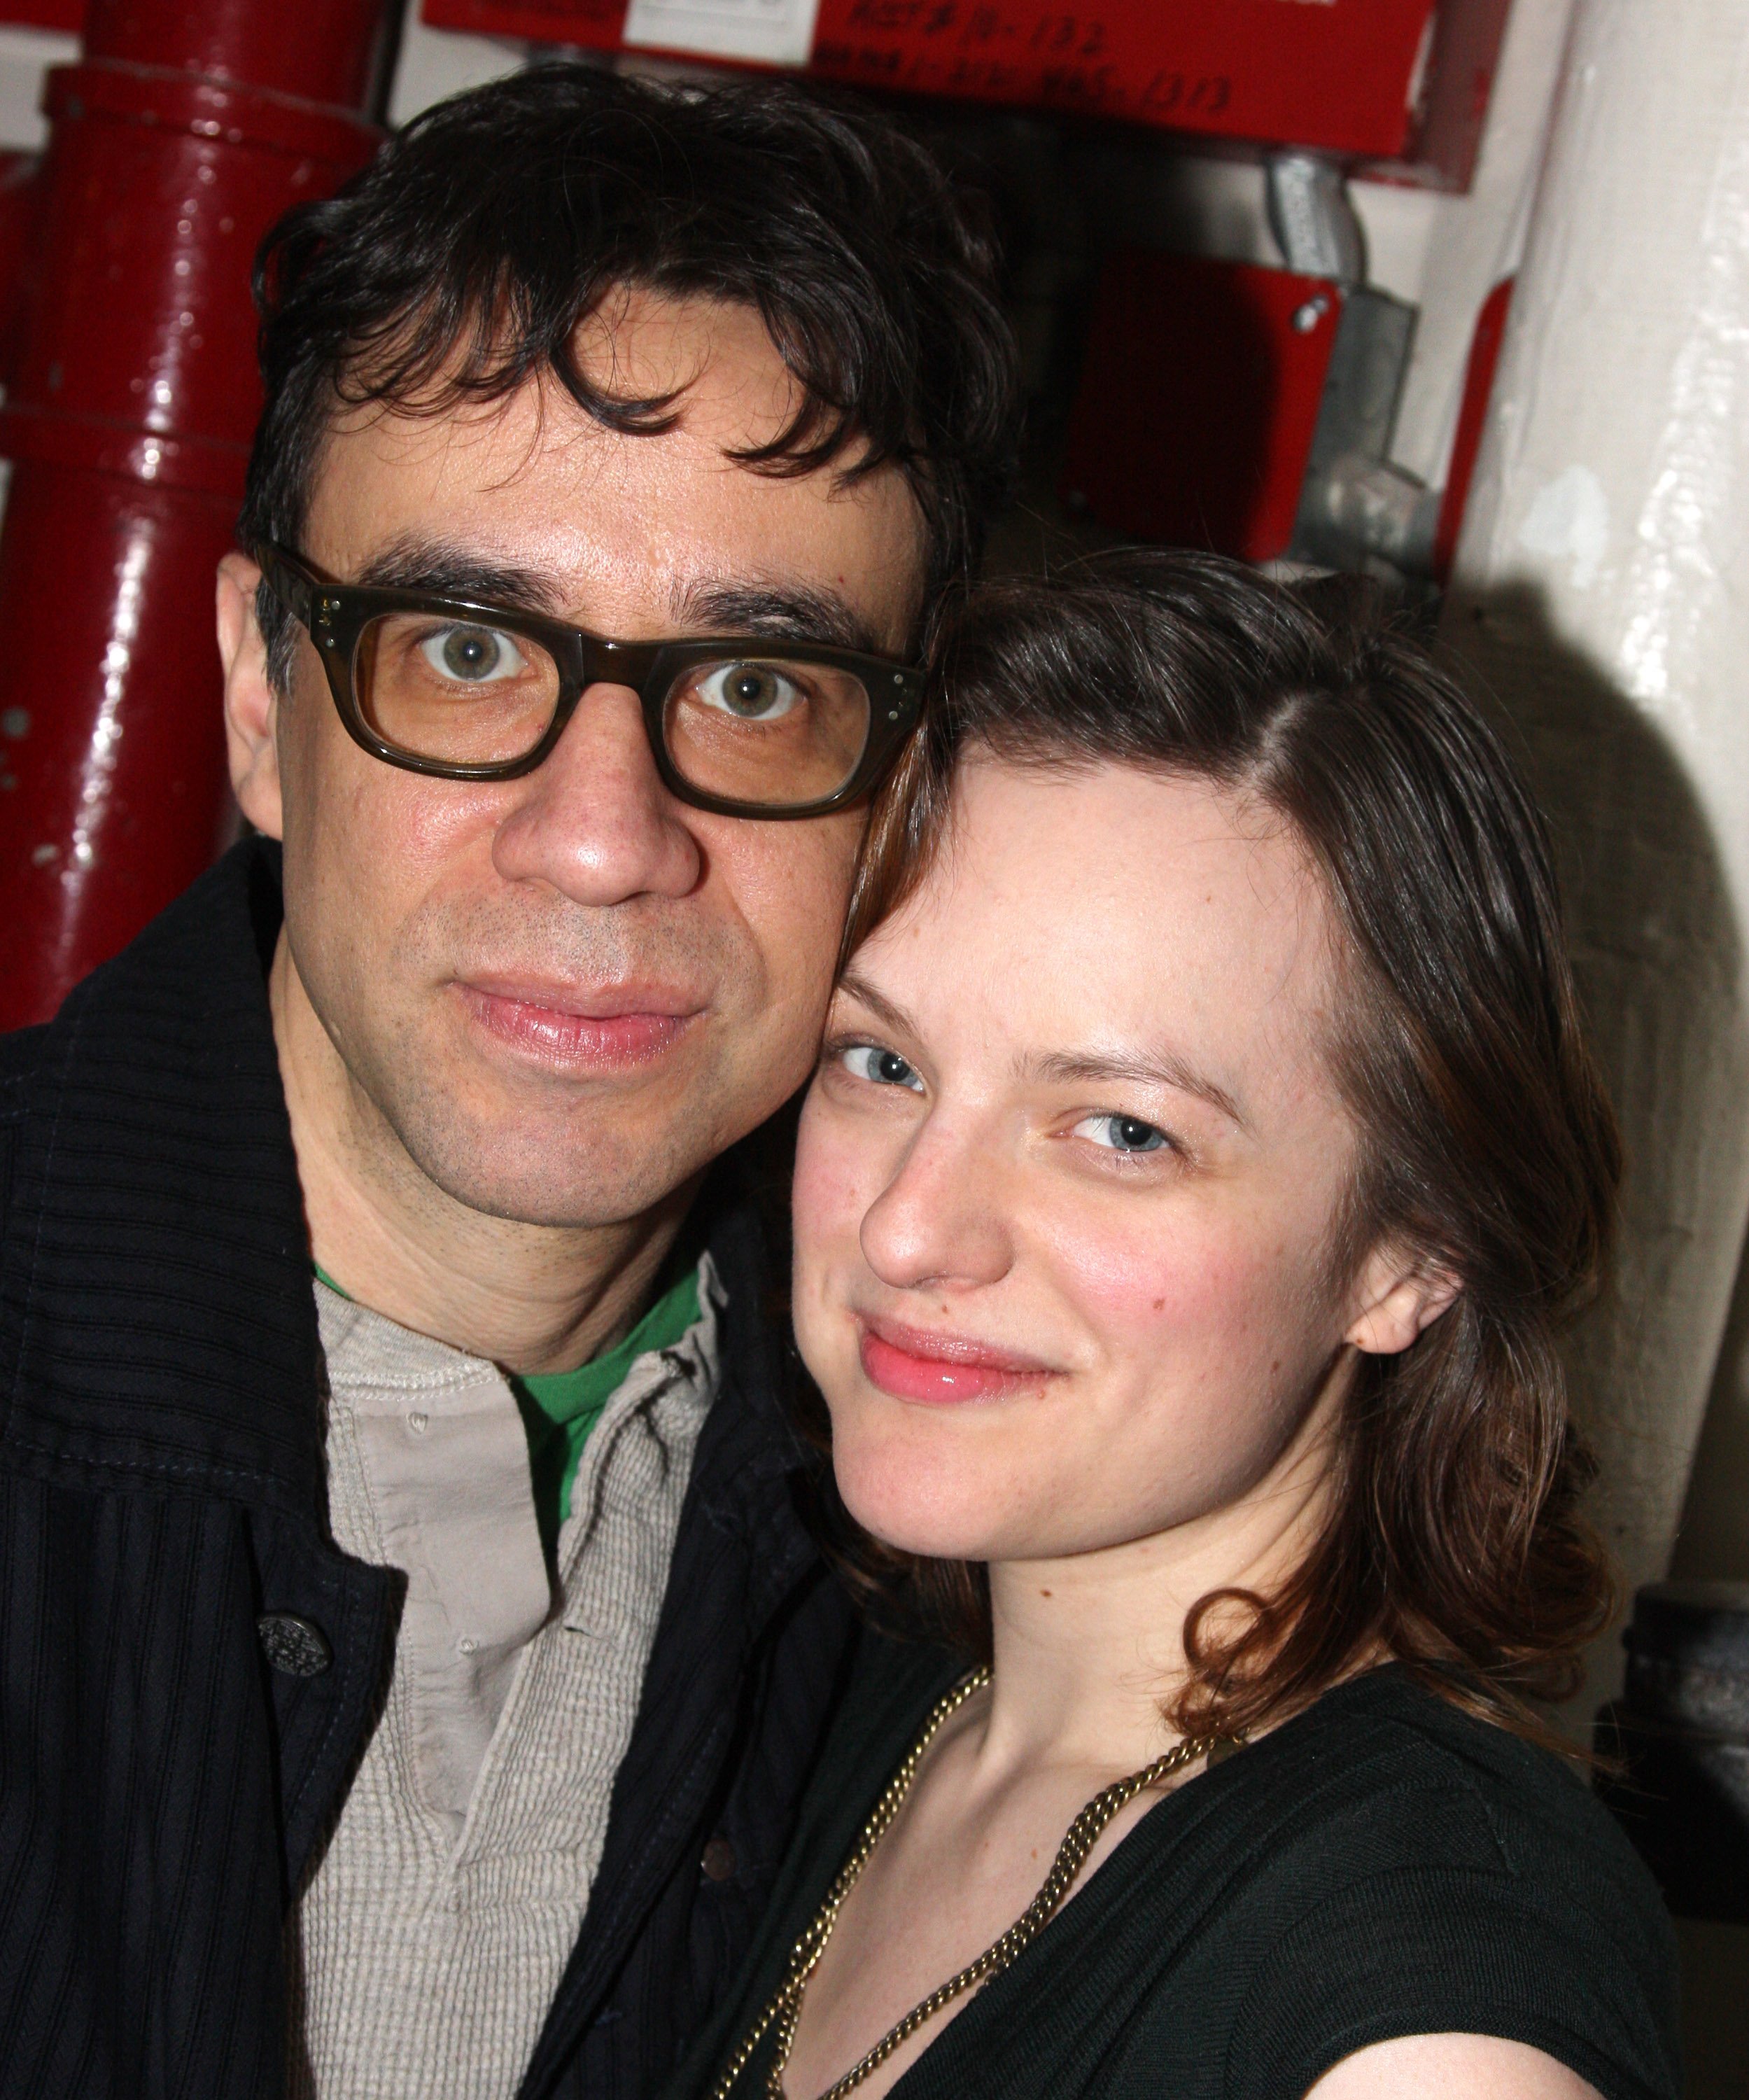 Fred Armisen and Elisabeth Moss at The Barrymore Theater on February 17, 2009, in New York City. I Source: Getty Images